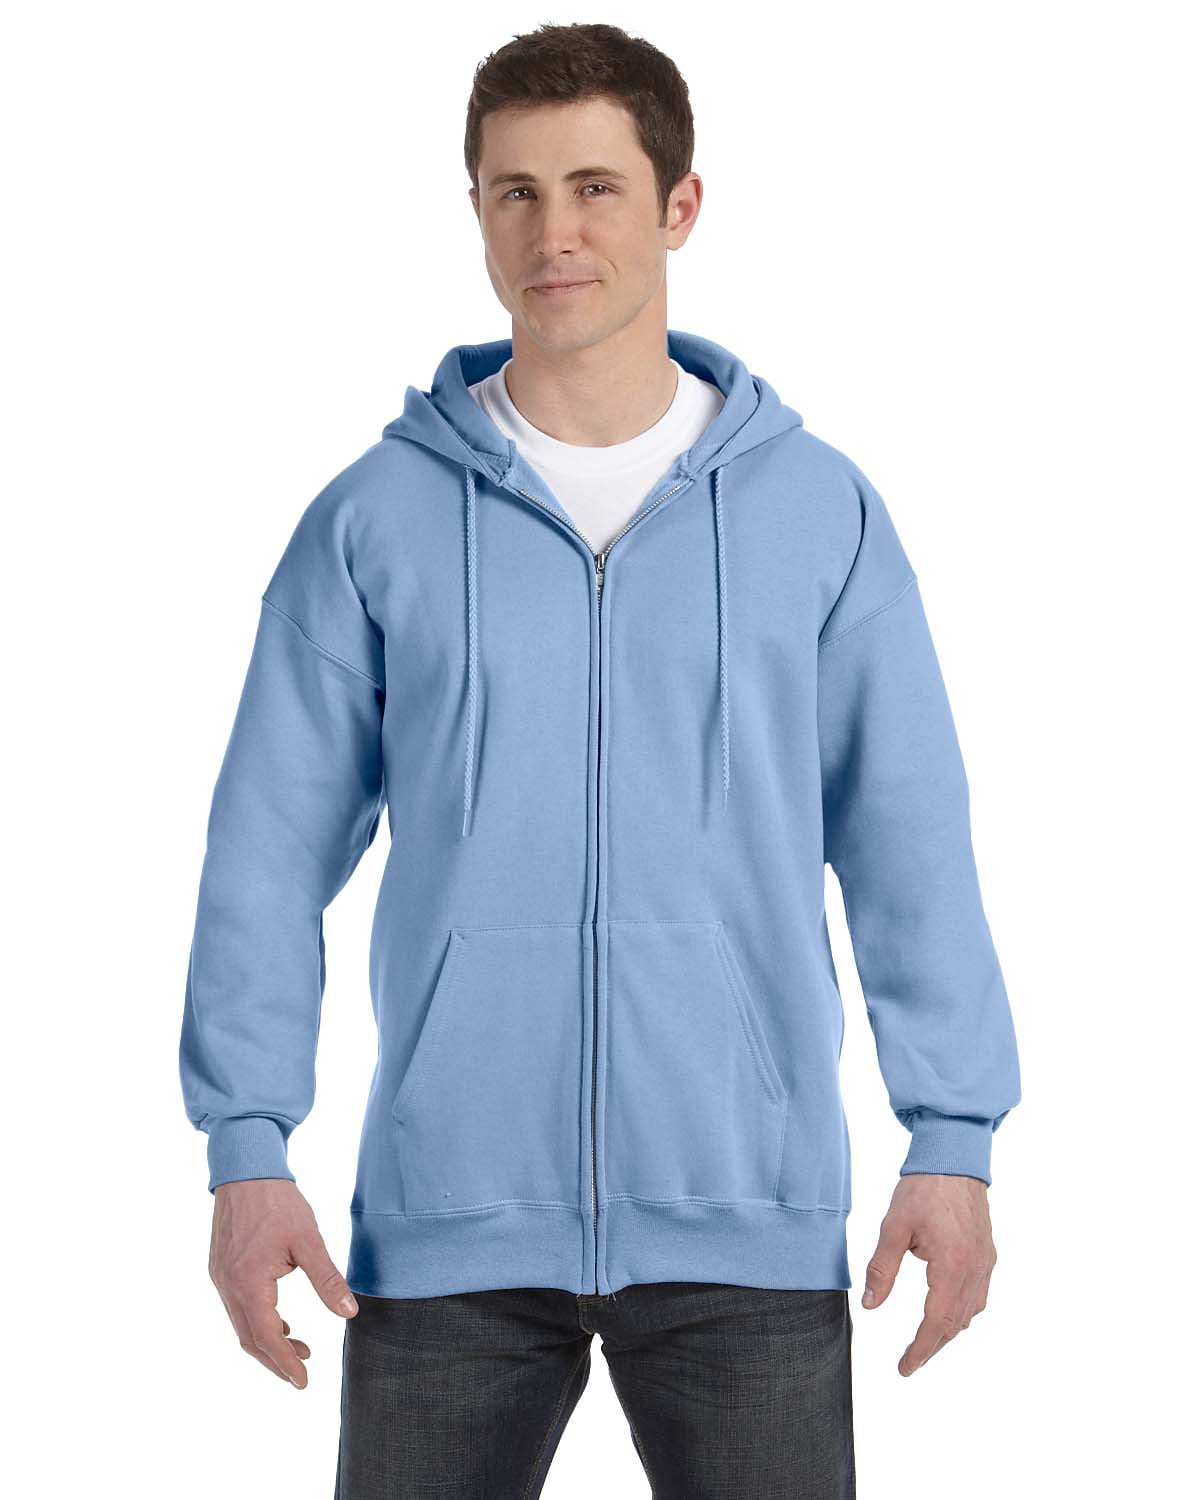 Details about   Hanes Men’s Ultimate Cotton® Heavyweight Full Zip Hoodie